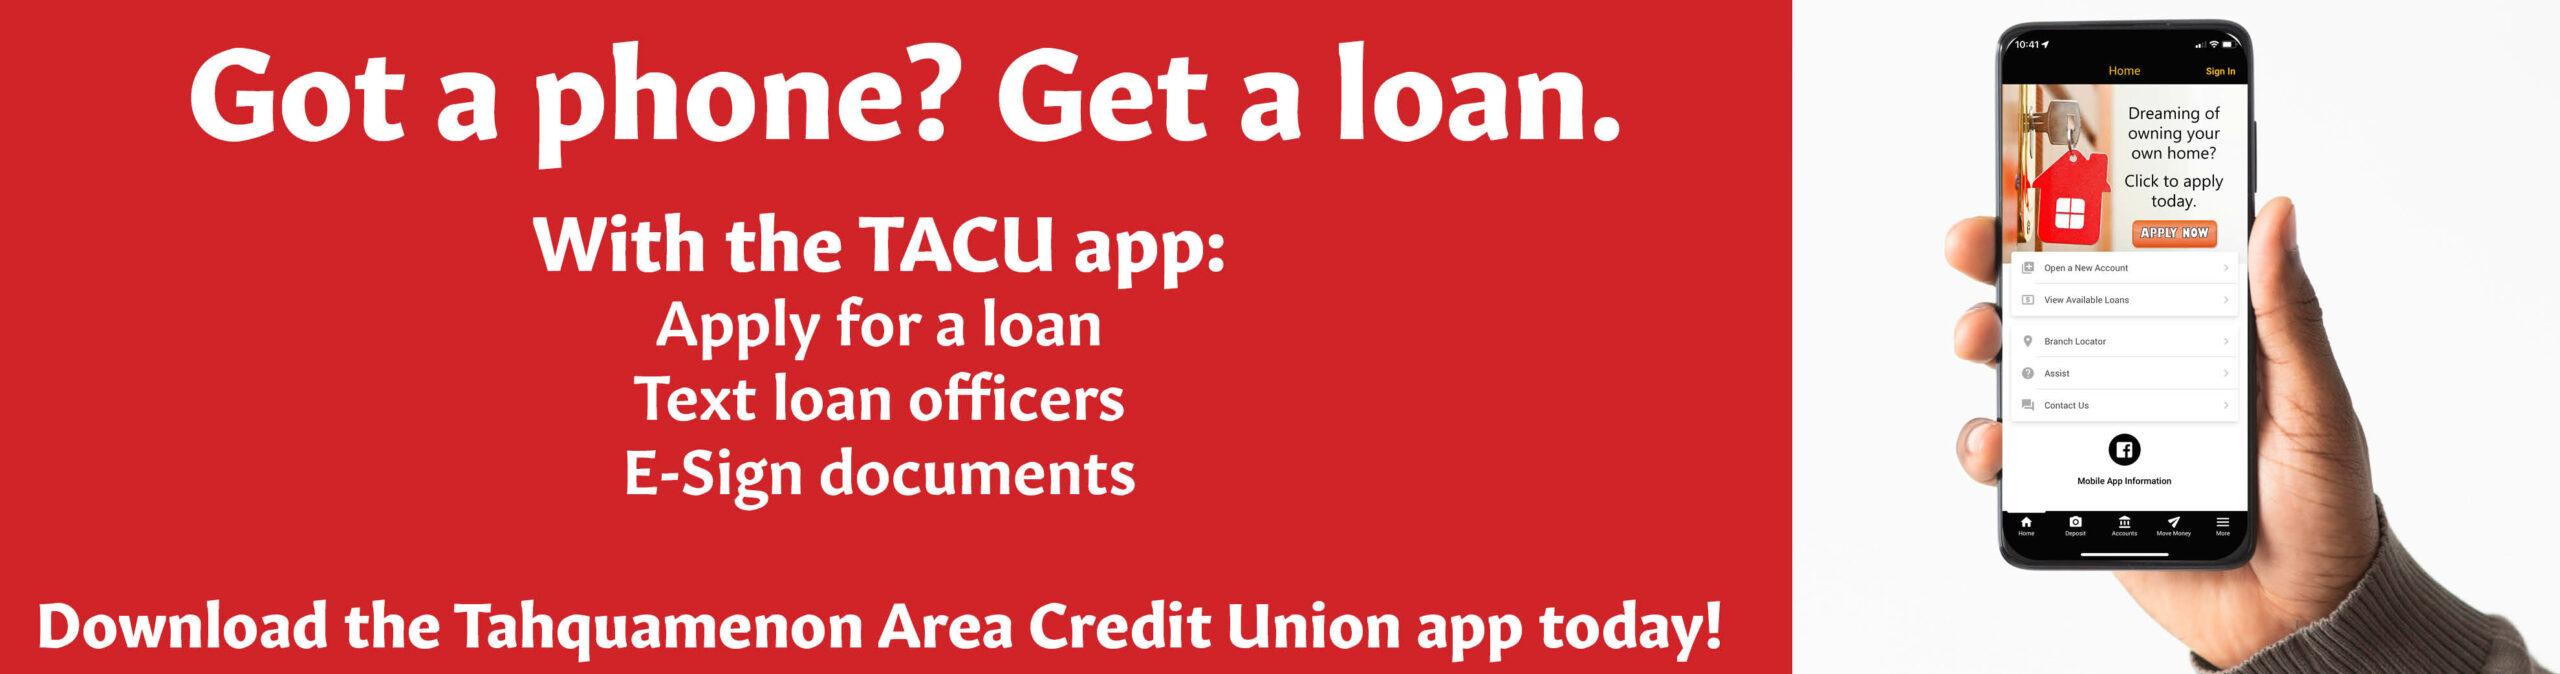 Got a phone? Get a loan. Download the TACU app and apply for a loan, text loan officers, and e-sign documents